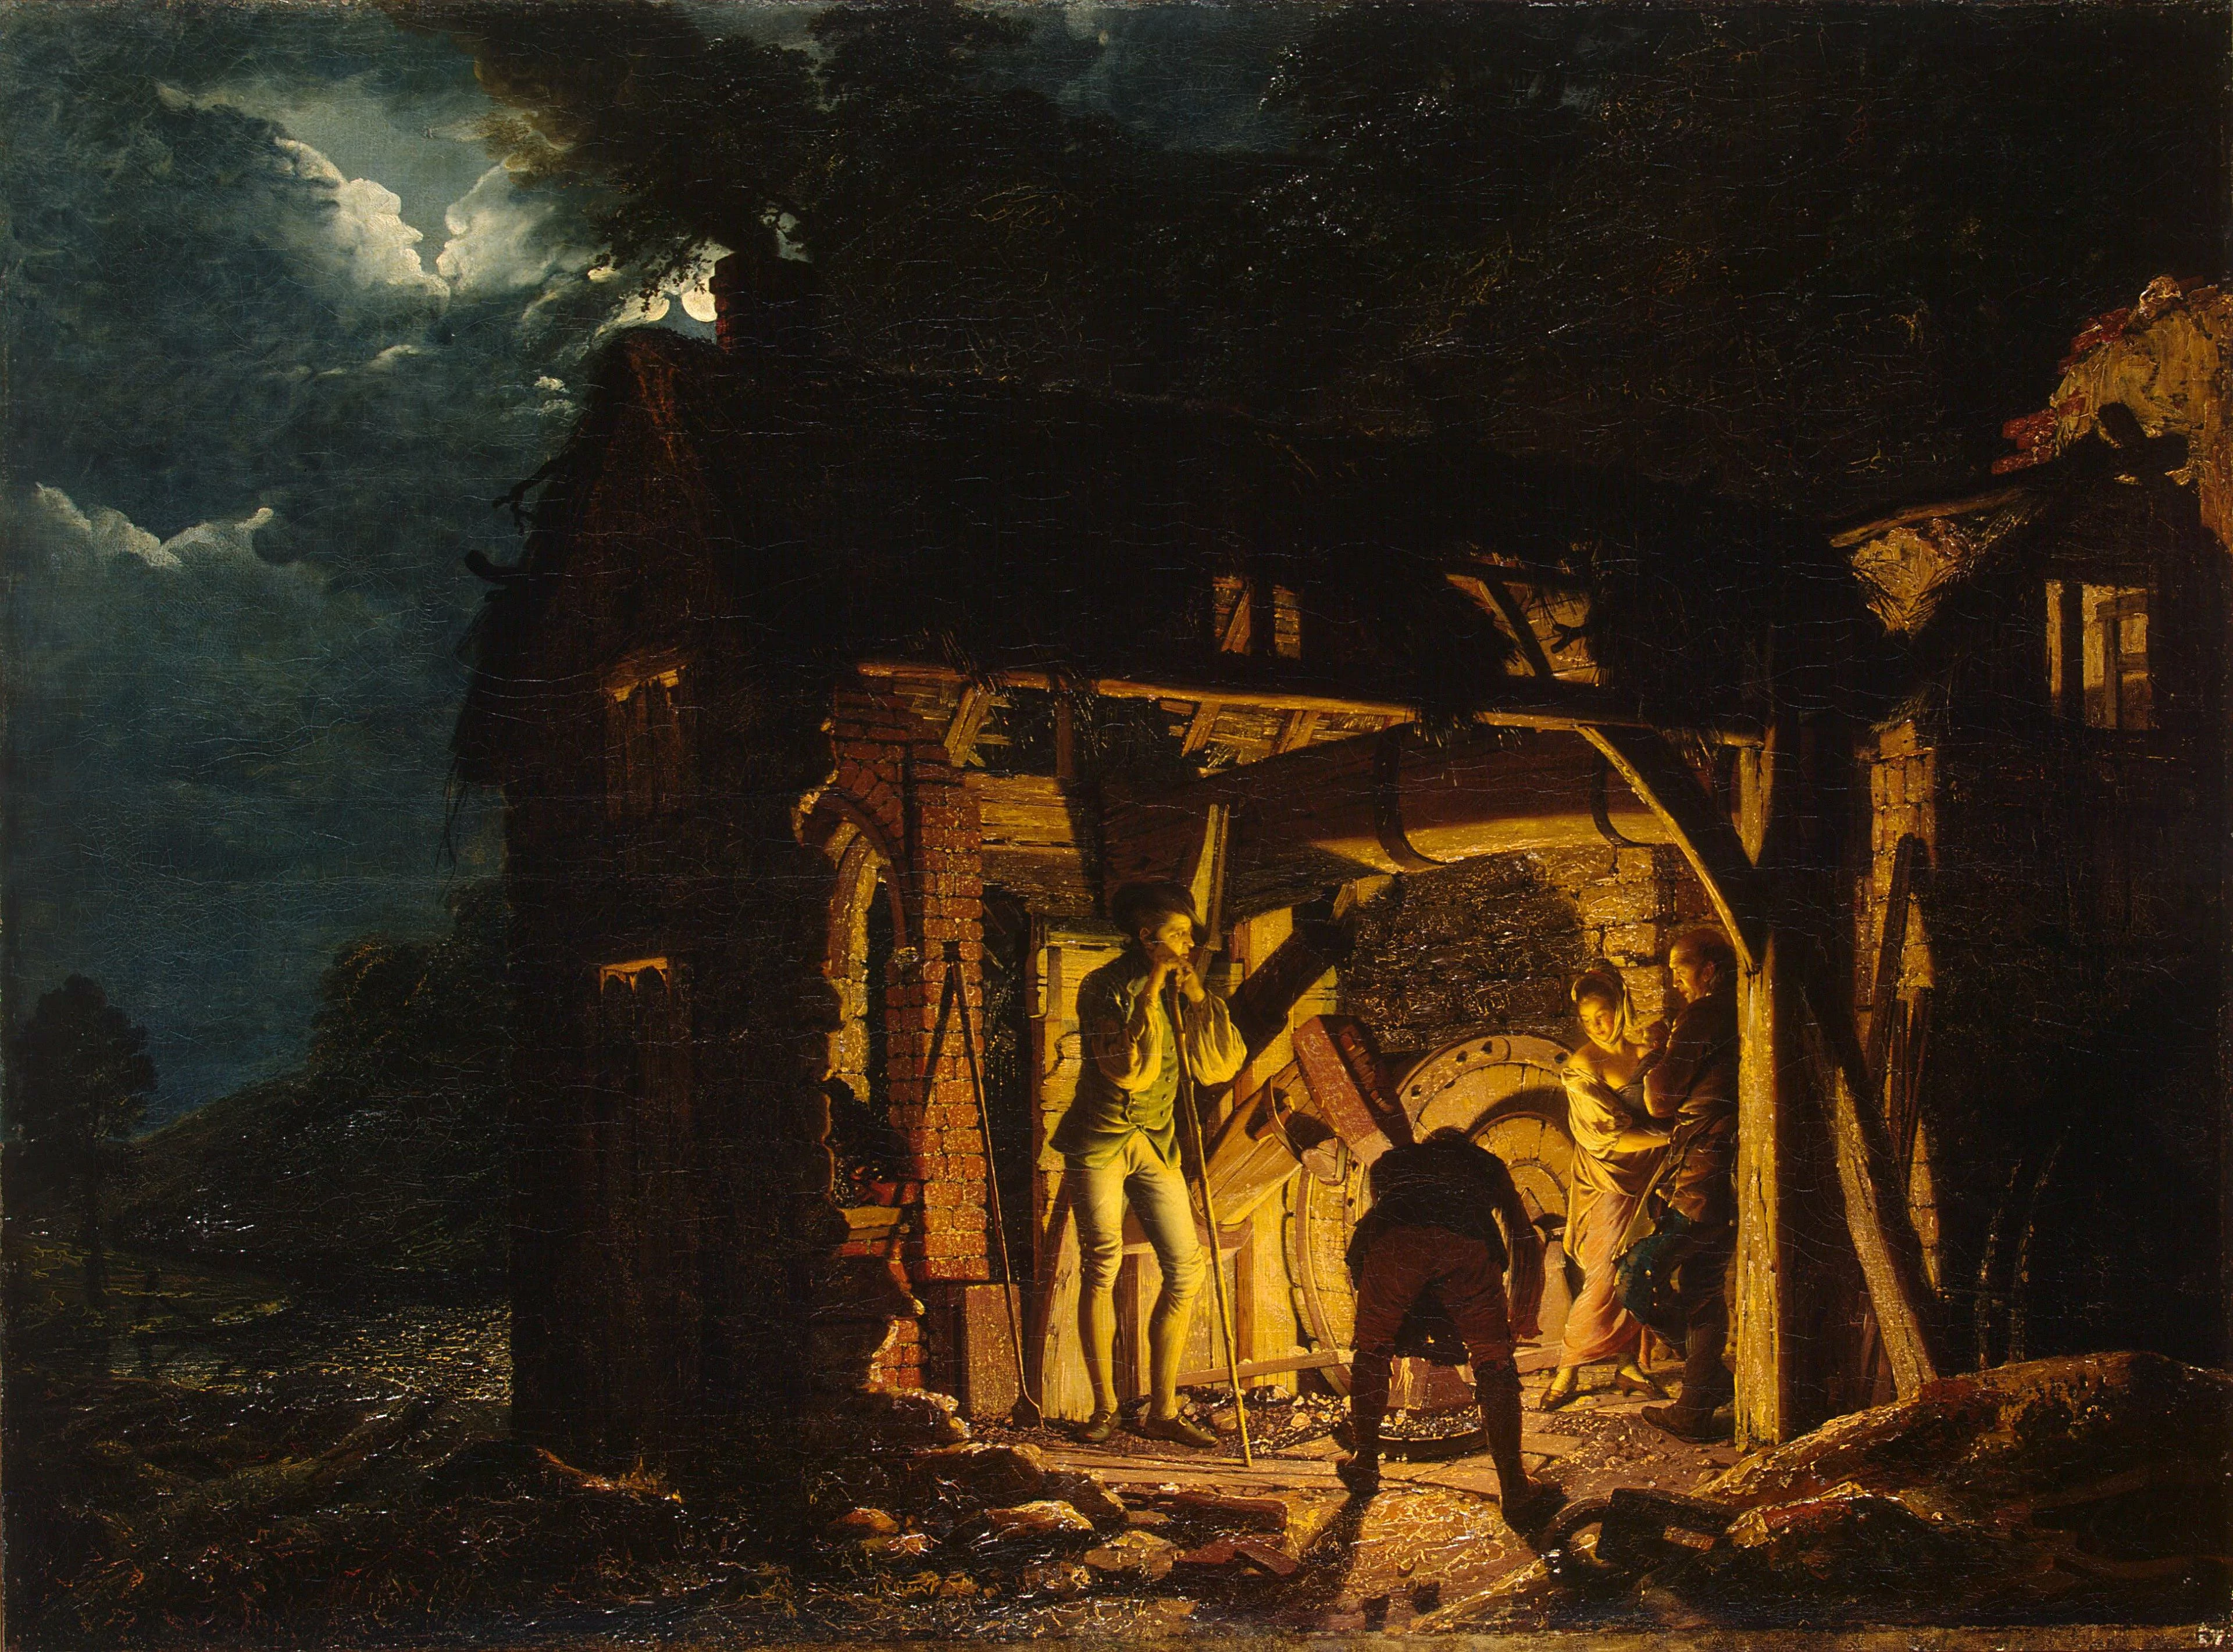 Iron Forge Viewed from Without, Joseph Wright of Derby